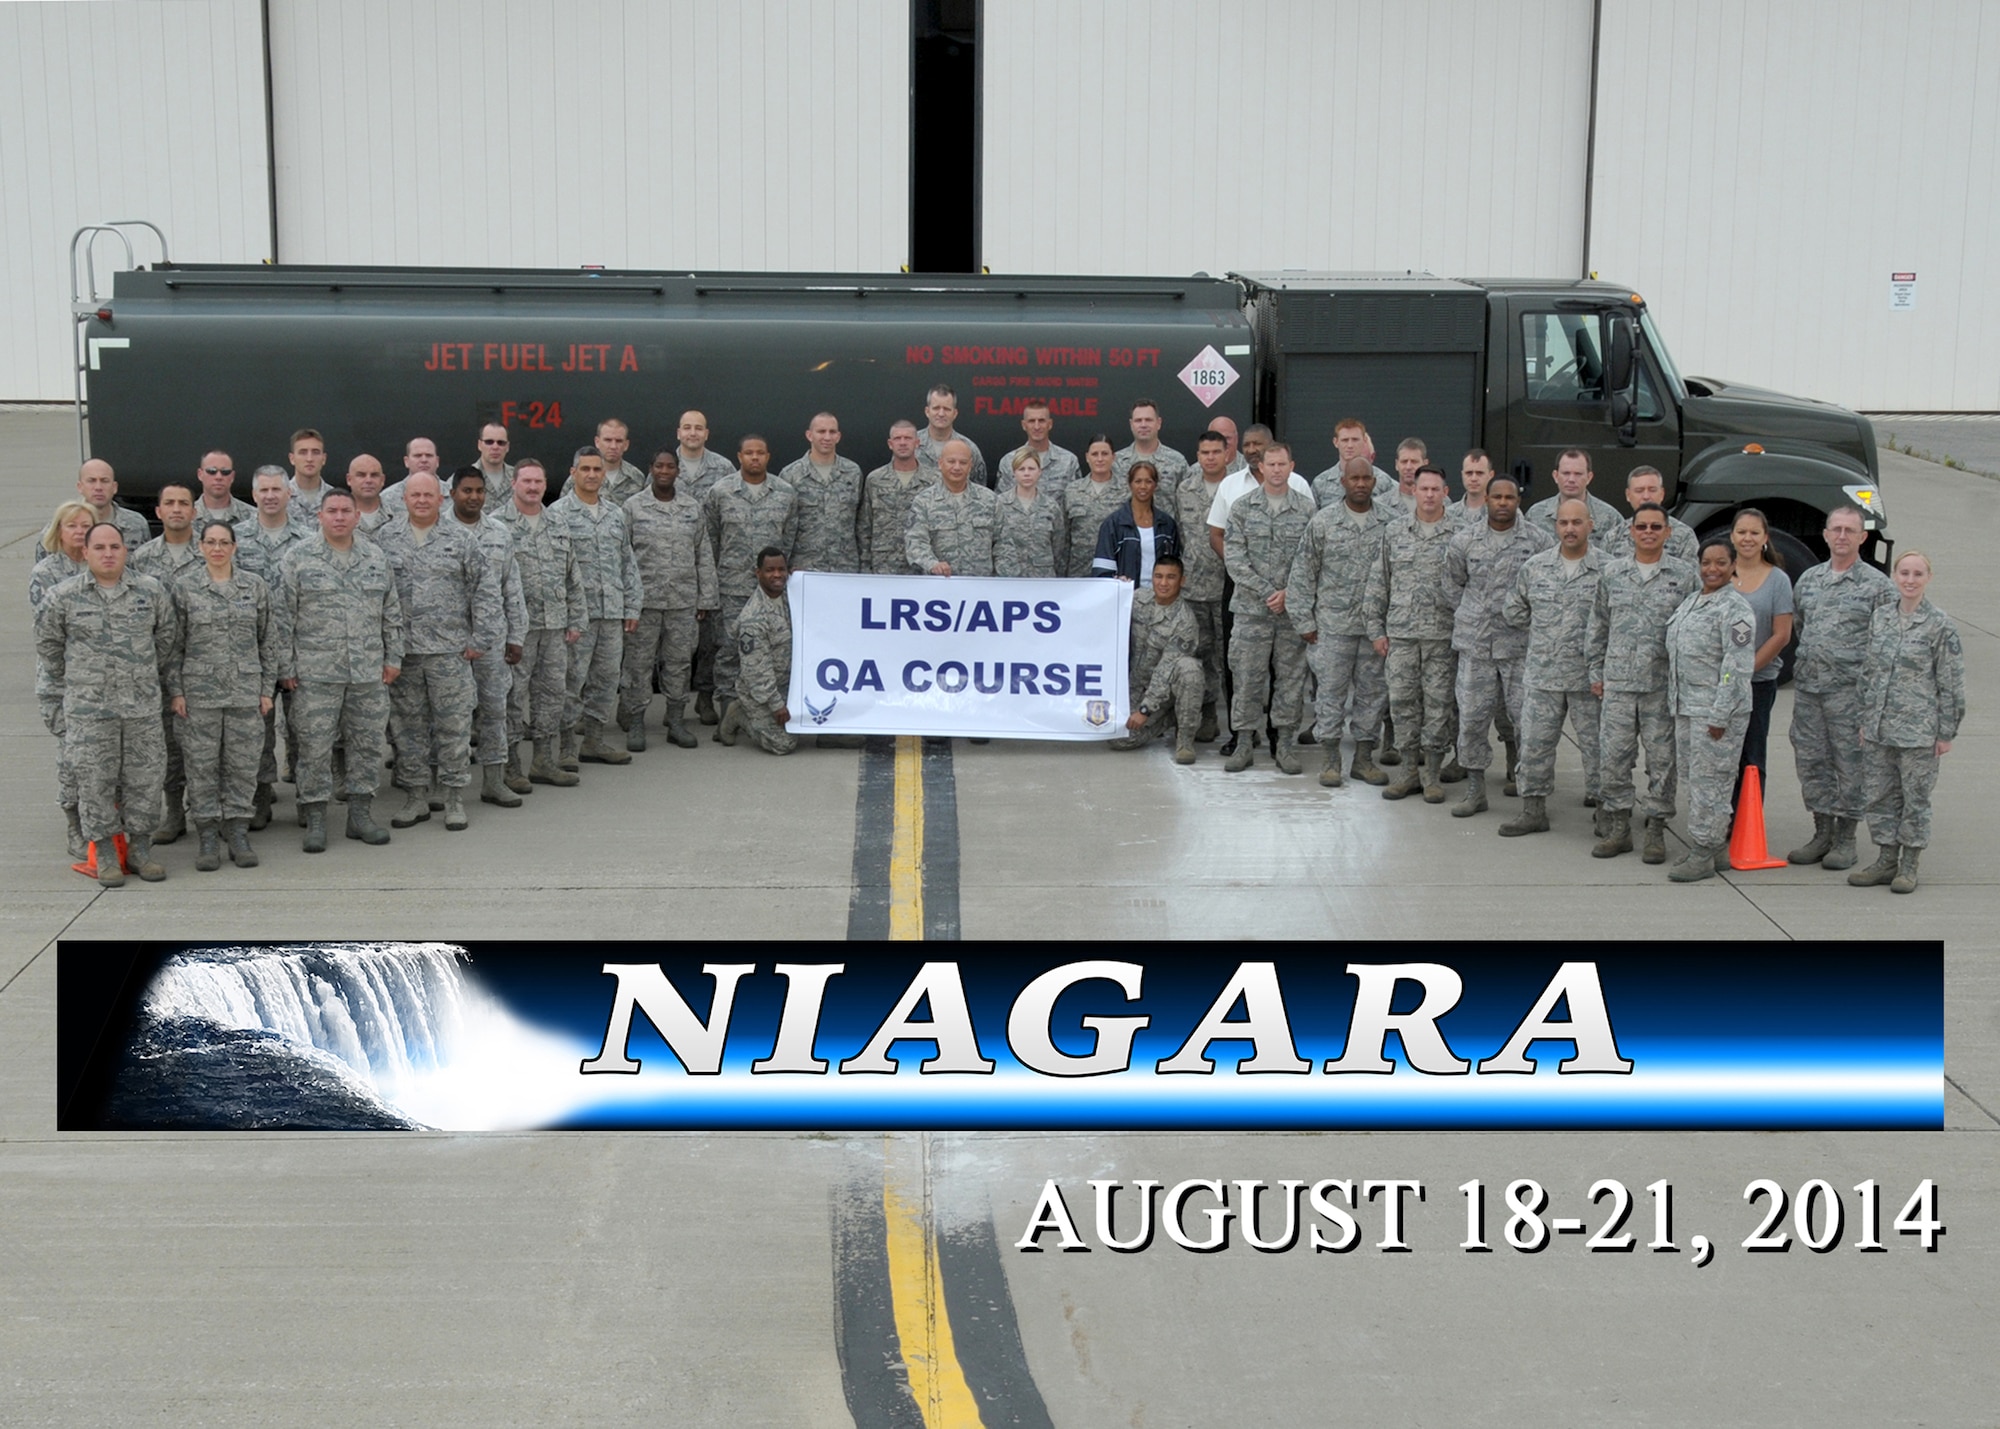 Logistics Readiness Squadron and Aerial Port Squadron members from all over the country pose for a group photo in front of an R-11 fuel truck on August 20, 2014 at the Niagara Falls Air Reserve Station, N.Y.  These LRS and APS members all attended a four day quality assurance course held at Niagara every year to qualify them as QA evaluators for their unit. Some members have attended this course from as far away as Joint Base Pearl Harbor Hickam in Hawaii. (U.S. Air Force photo by Peter Borys)